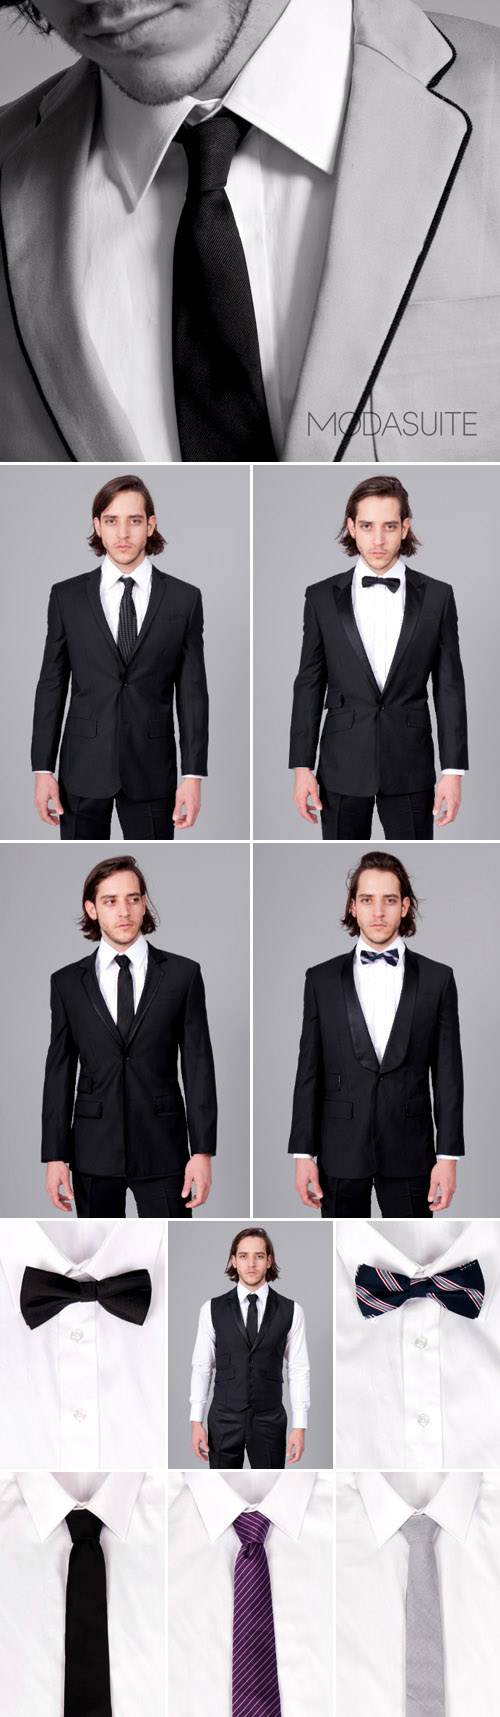 Modern men's wedding suits and tuxedos from Modasuite